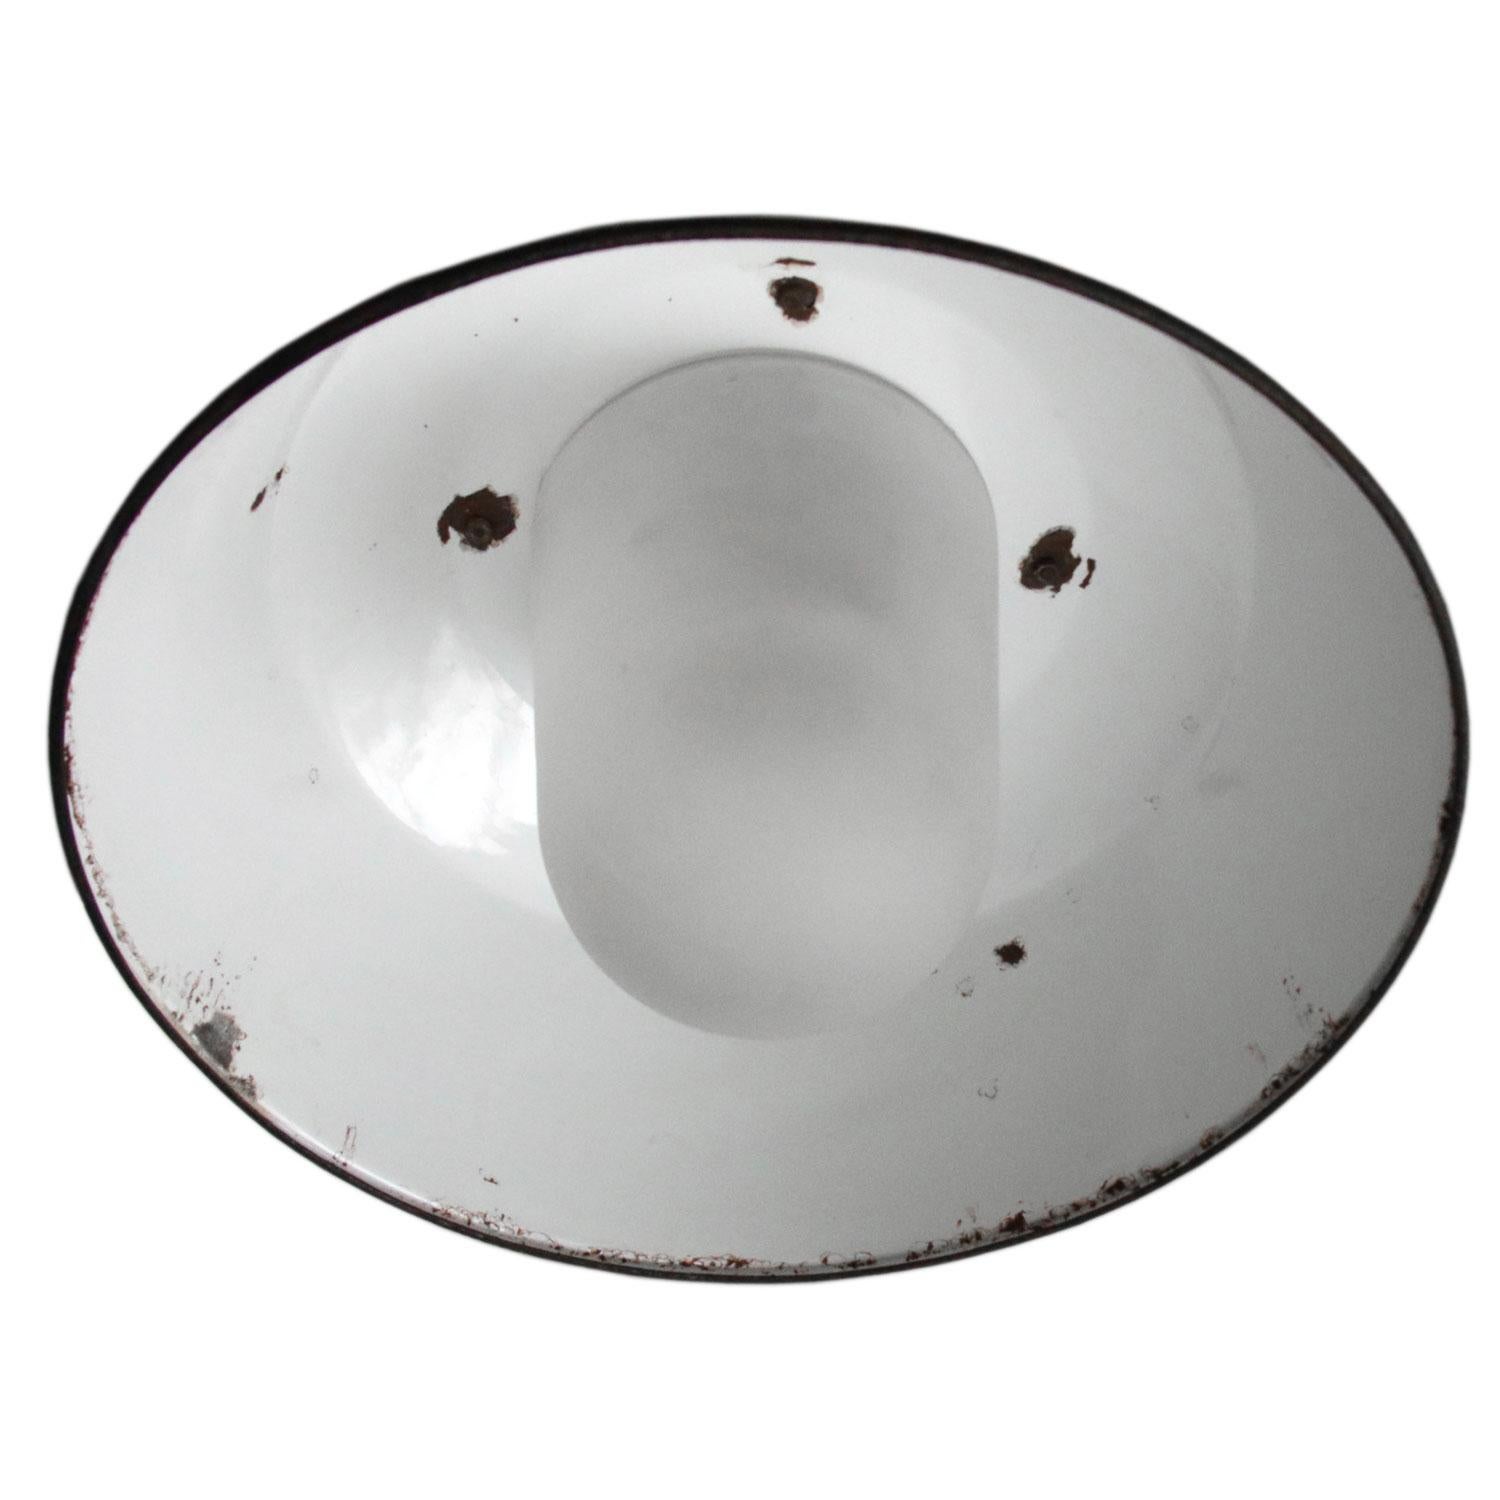 Factory hanging lamp
White enamel white interior
Frosted glass, cast iron top

Weight 5.50 kg / 12.1 lb

Priced per individual item. All lamps have been made suitable by international standards for incandescent light bulbs, energy-efficient